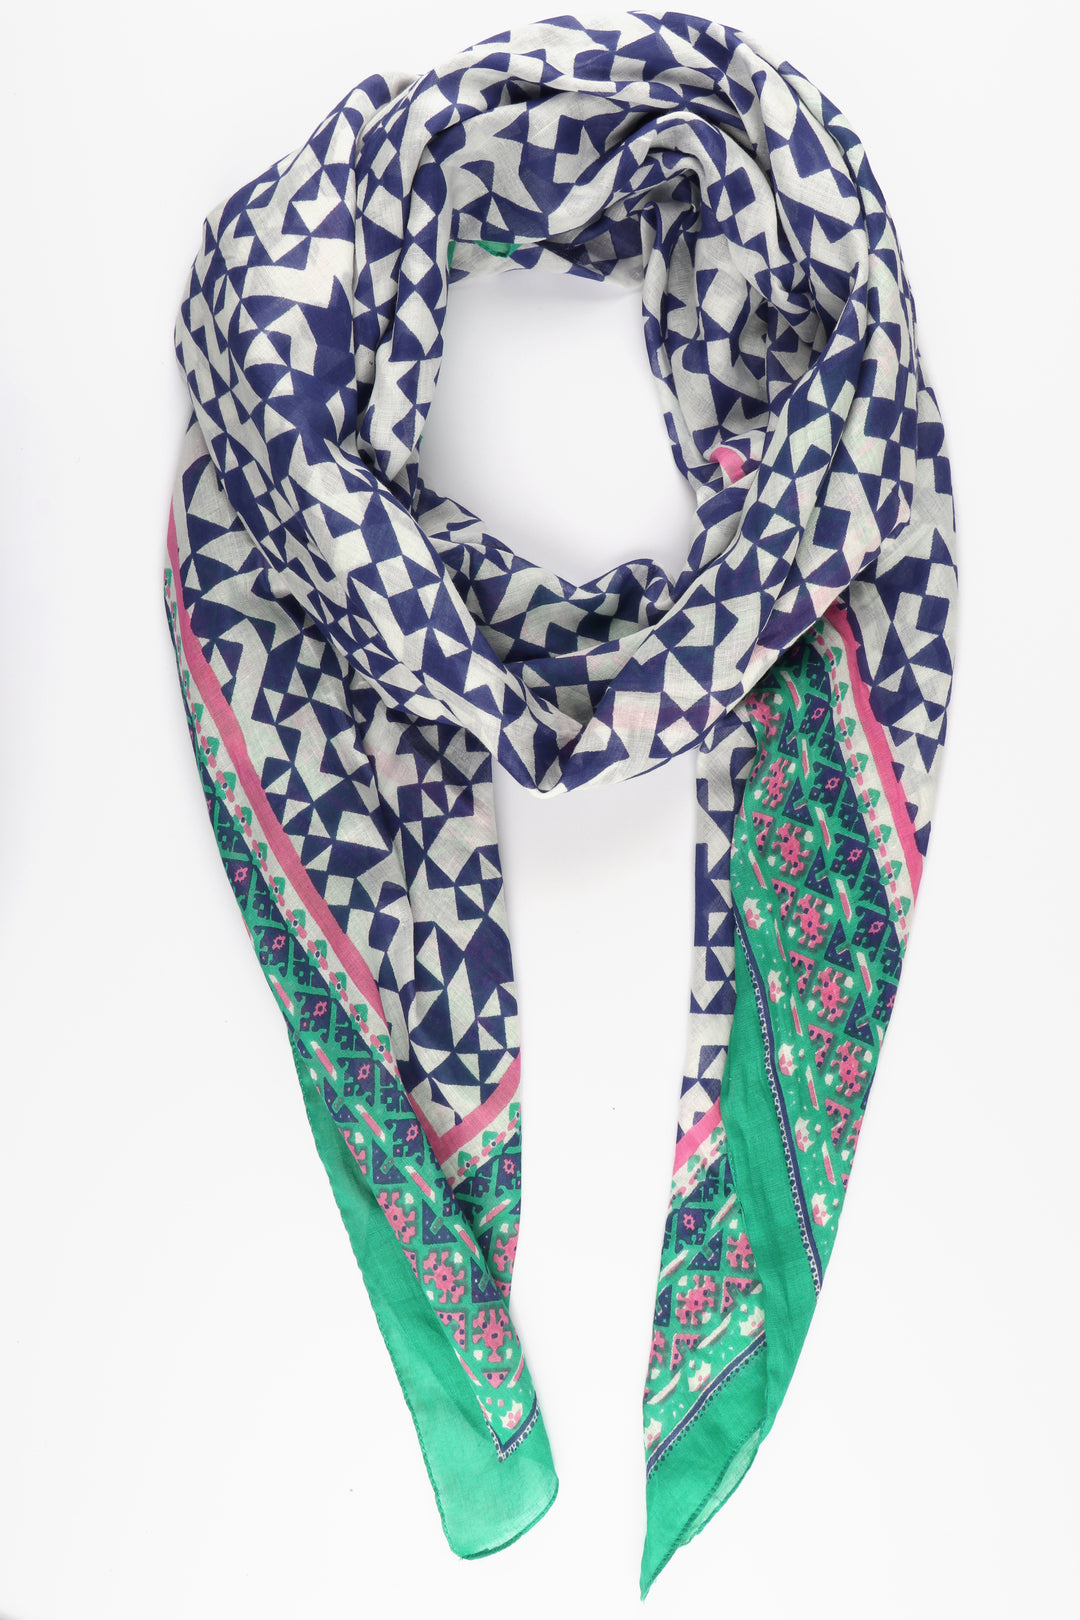 navy blue mosaic print cotton scarf with green patterned border trim